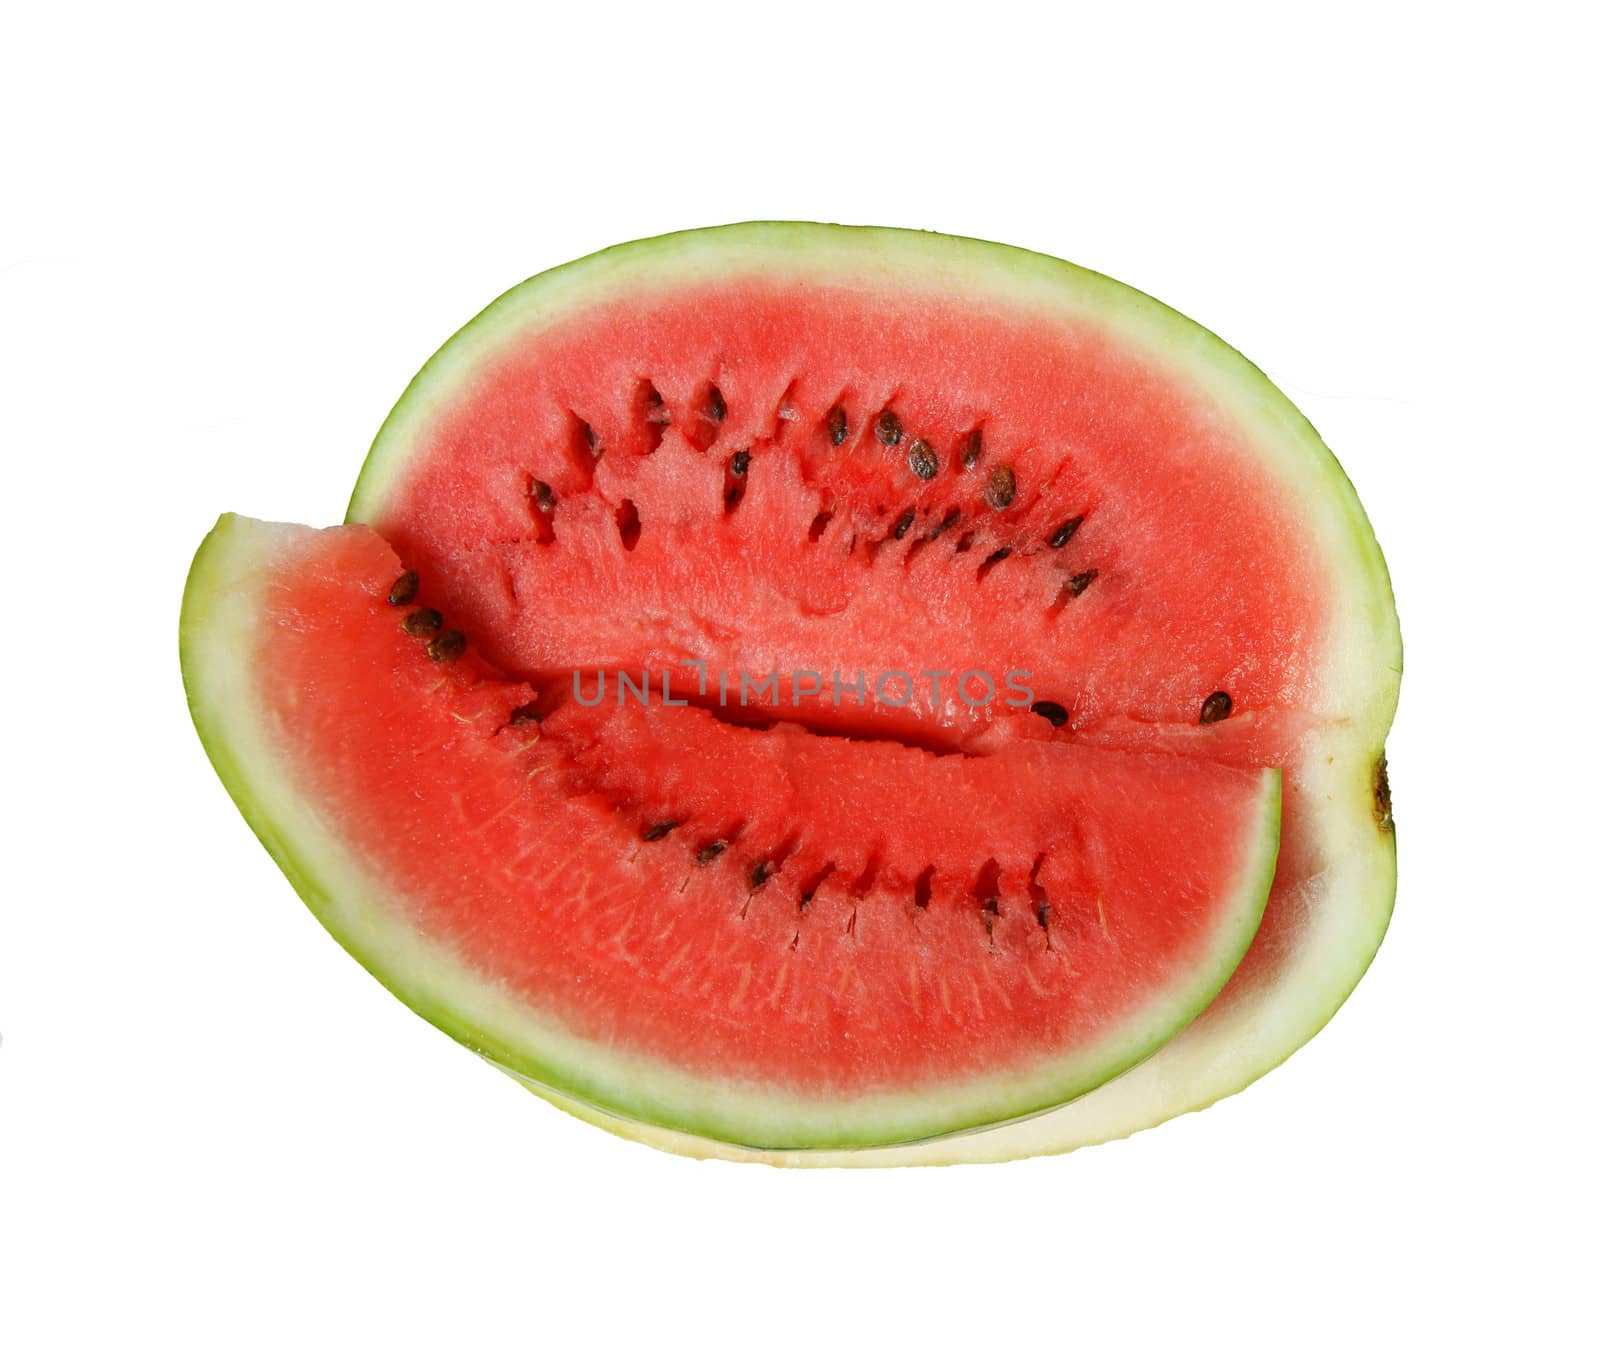 Sliced ripe watermelon isolated on white background by cobol1964